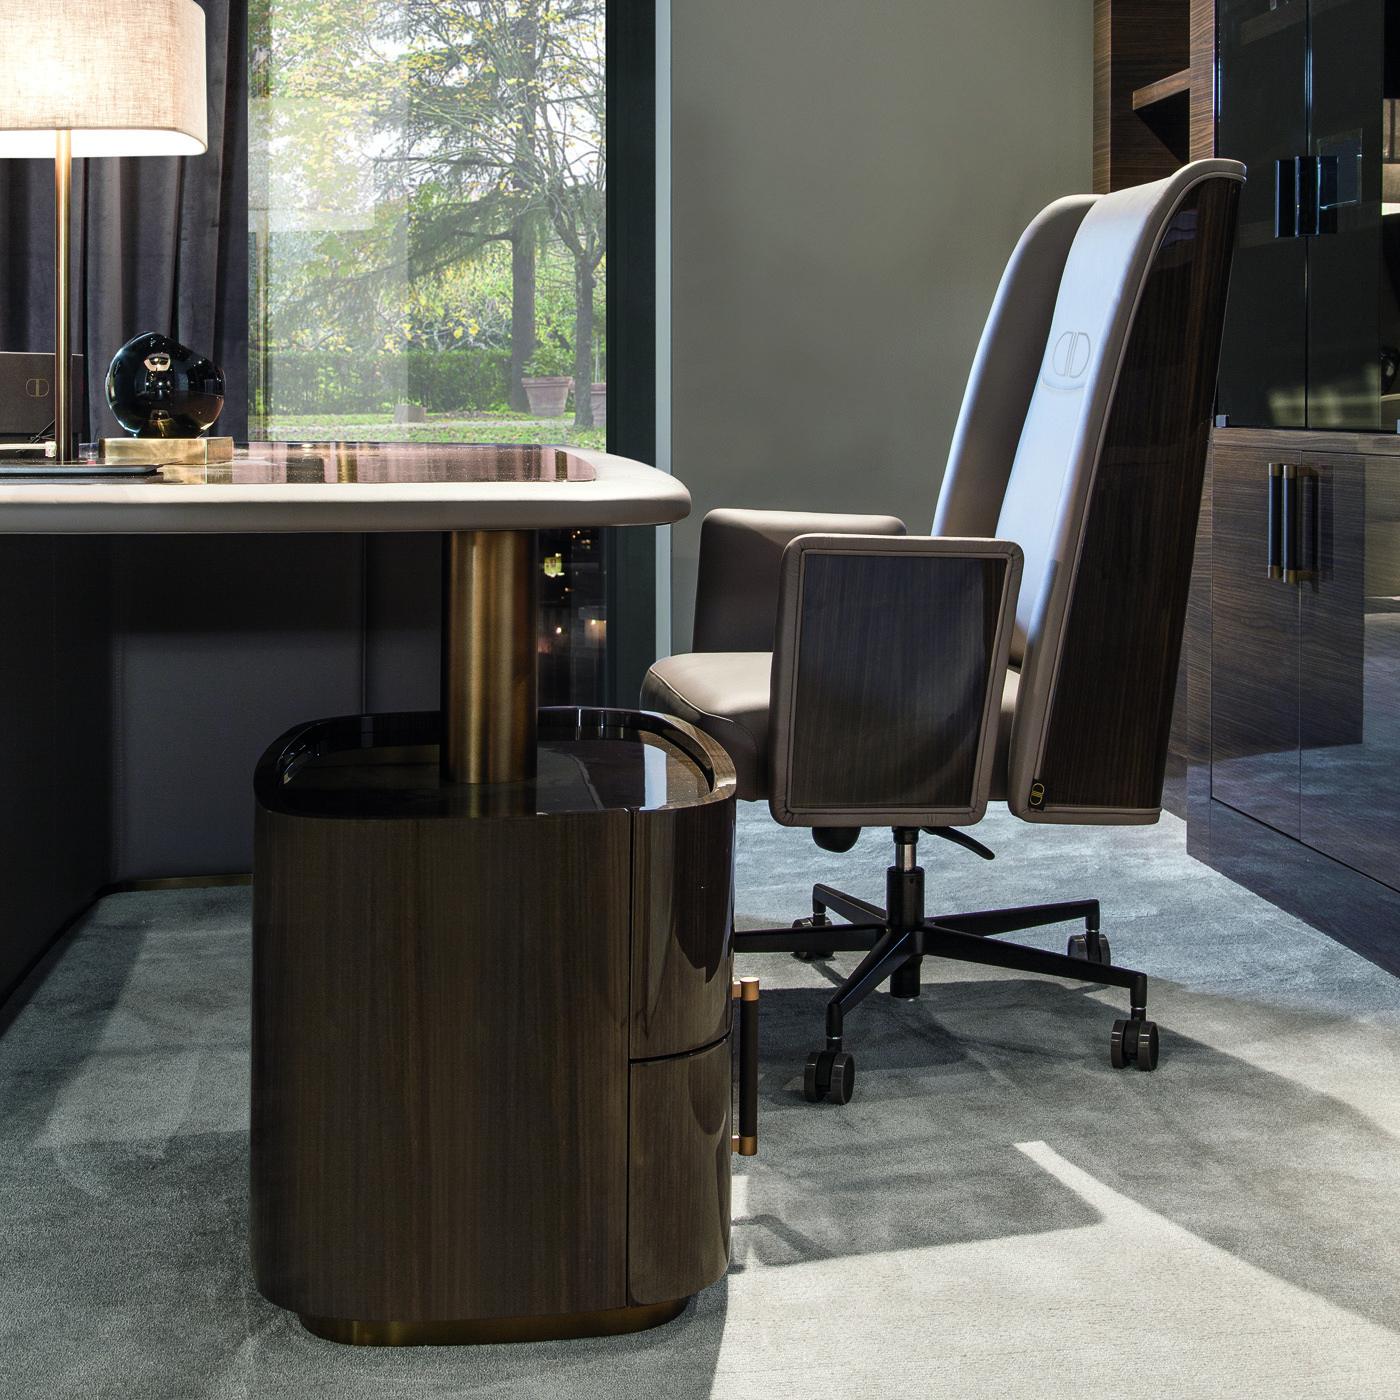 The Bill armchair has been designed with style and character, making it the perfect addition to your office space. The structure is crafted from curved plywood with the exterior covered in a dark walnut veneer in a brushed gloss finish, while the